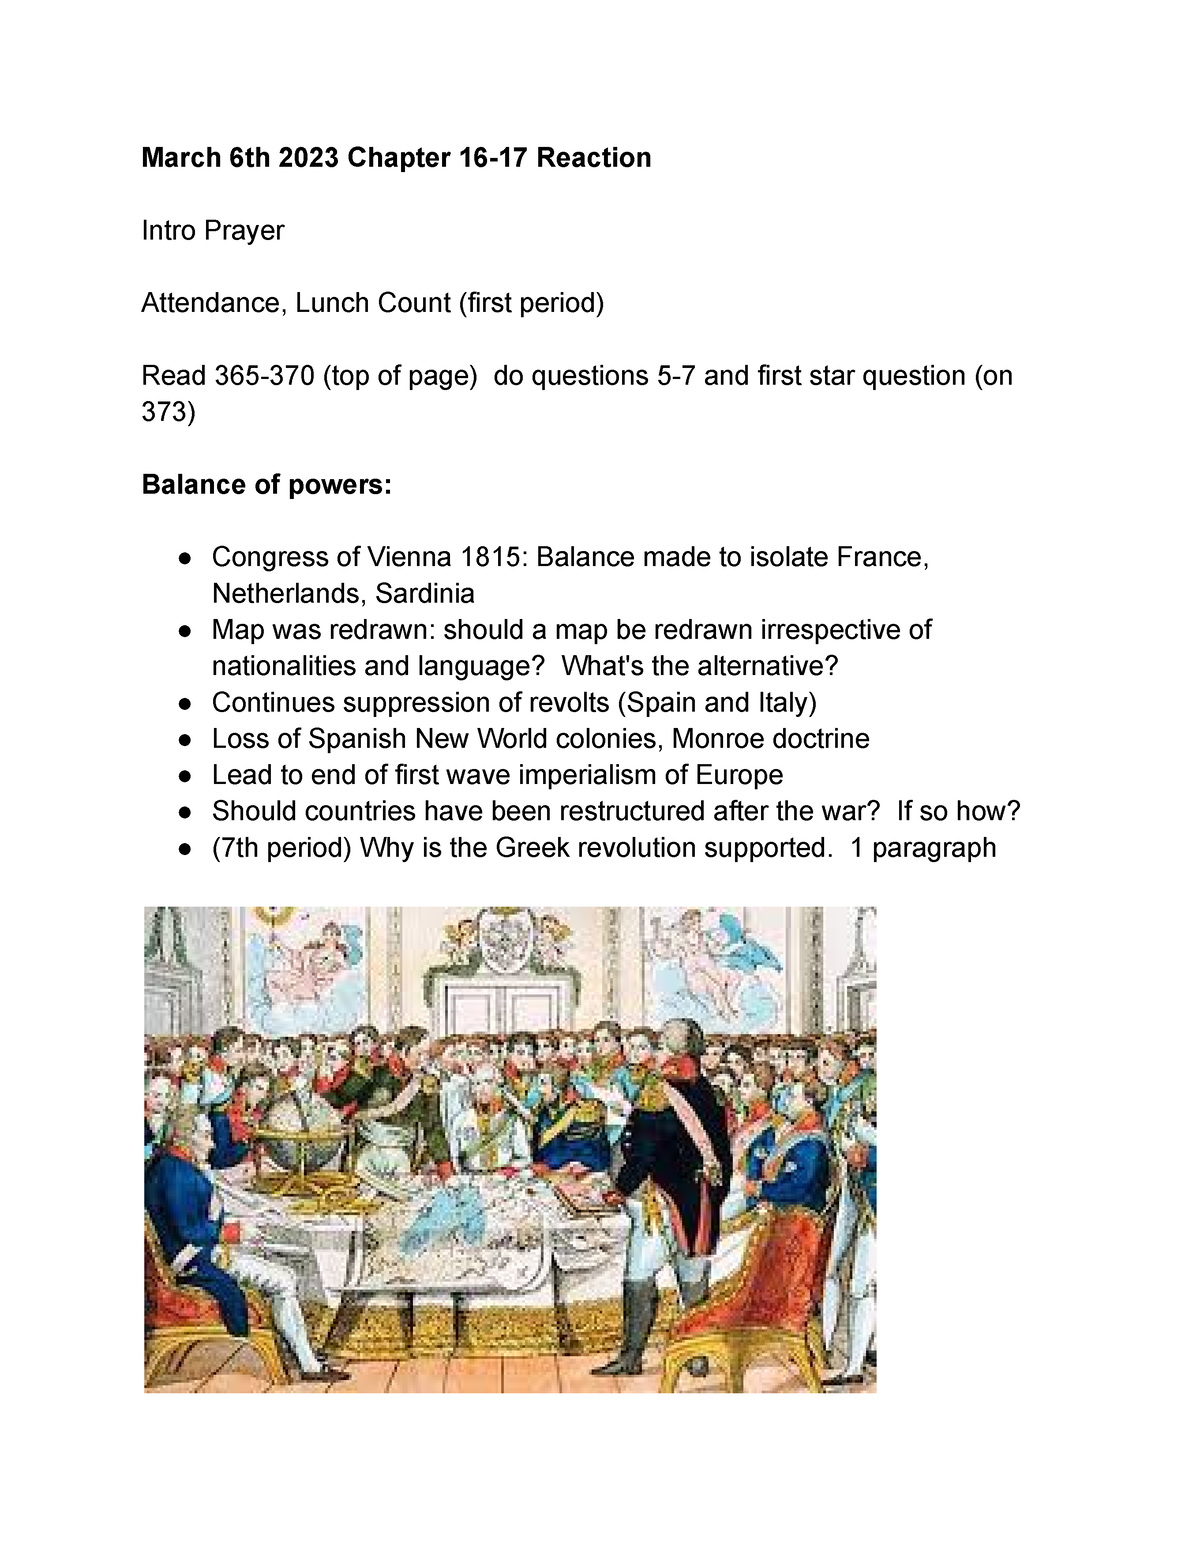 610 March World History March 6th 2023 Chapter 1617 Reaction Intro